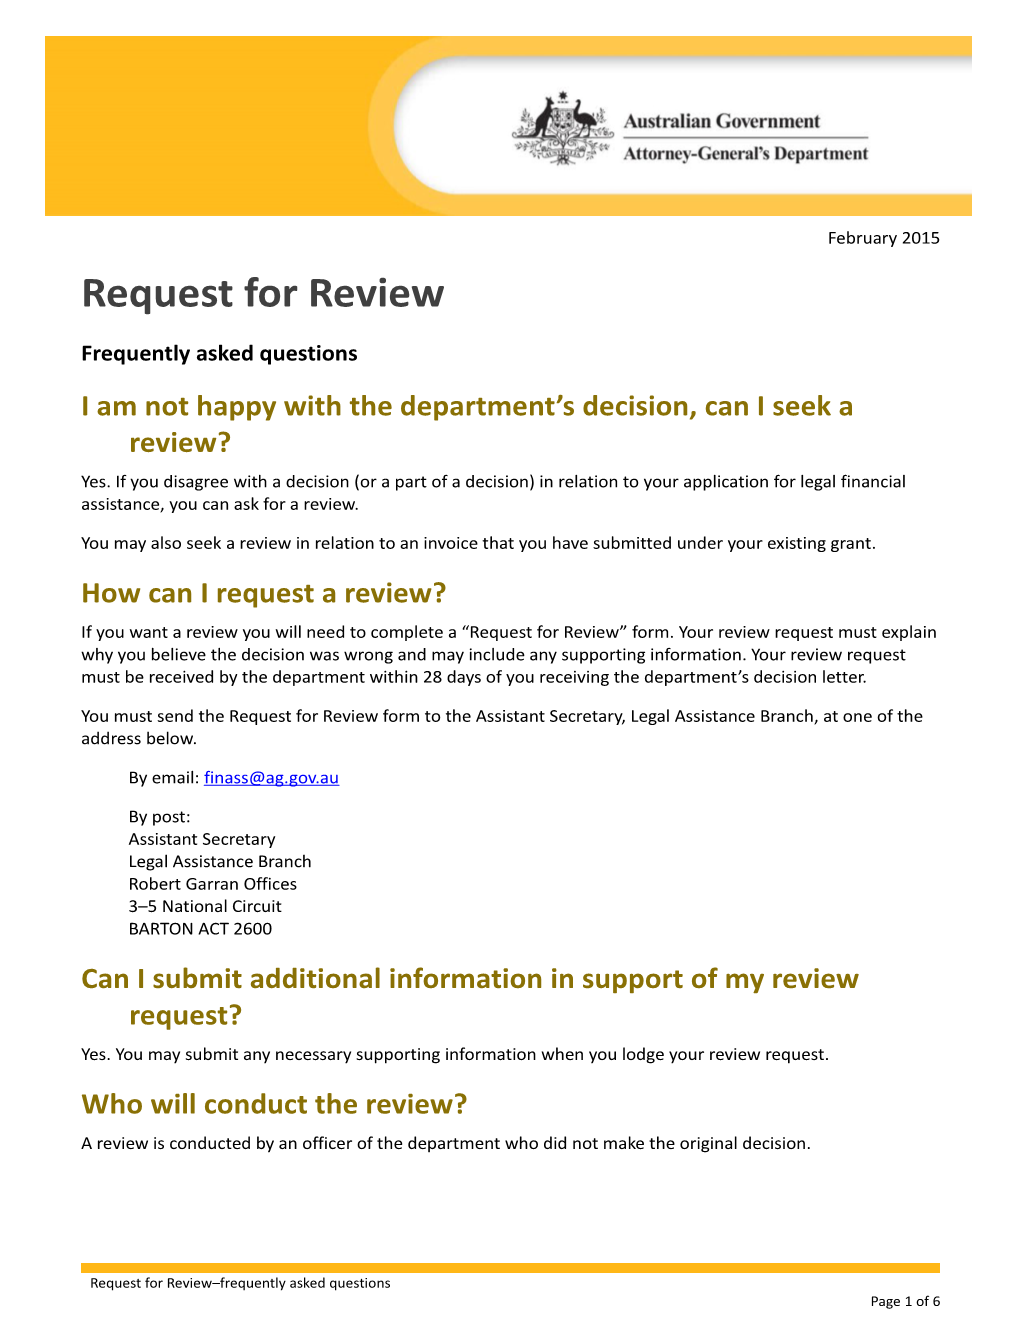 Review Factsheet and Review Request Form